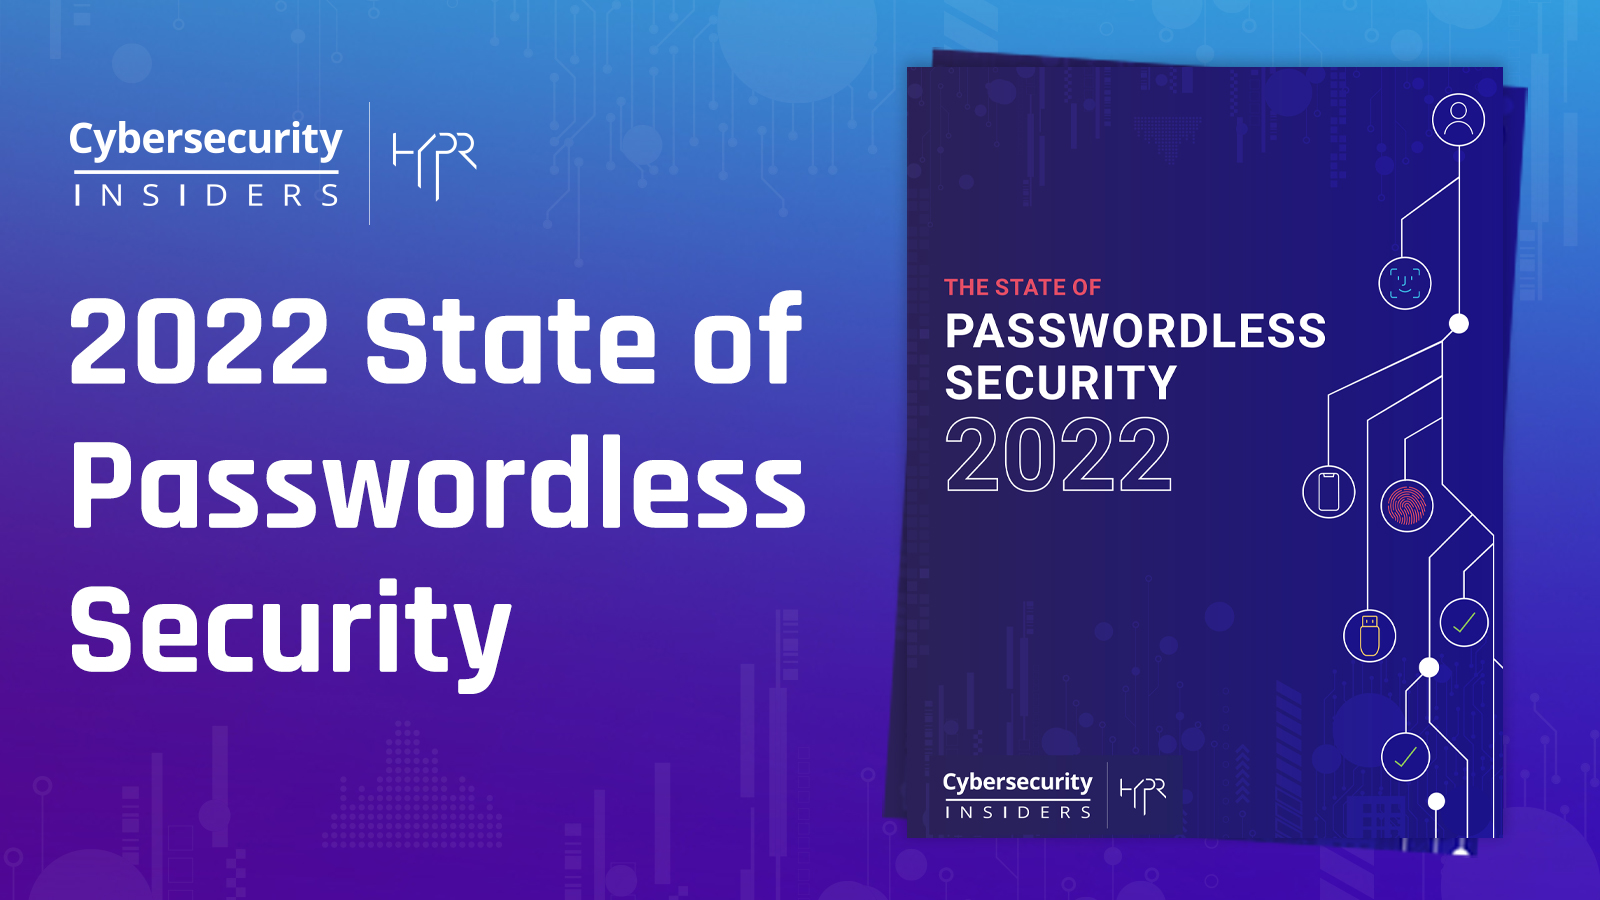 2022 State of Passwordless Security social card